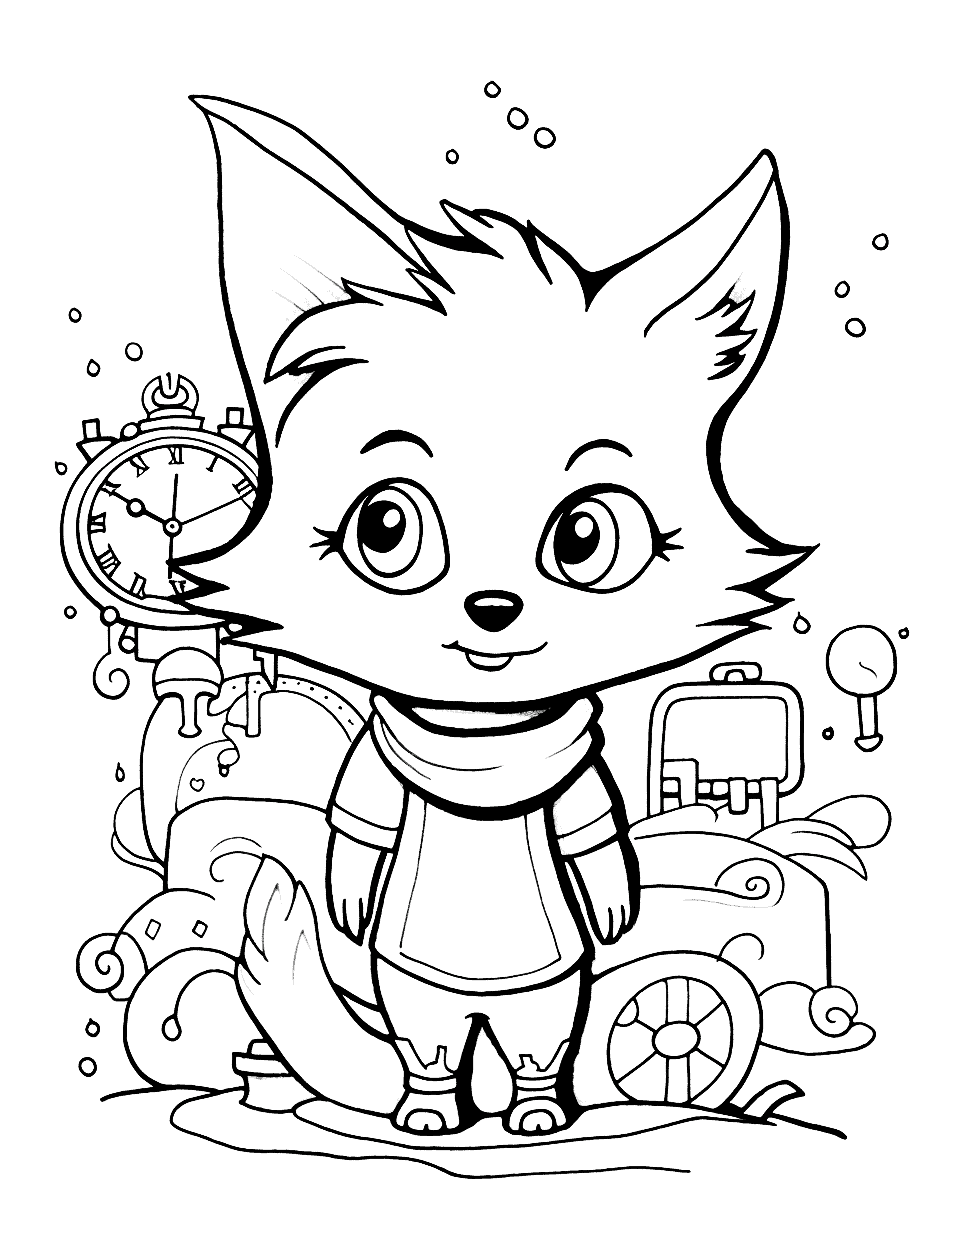 Fox's Time Travel Quest Fox Coloring Page - Surrounded by clocks and gears, a fox embarks on a time-traveling mission.